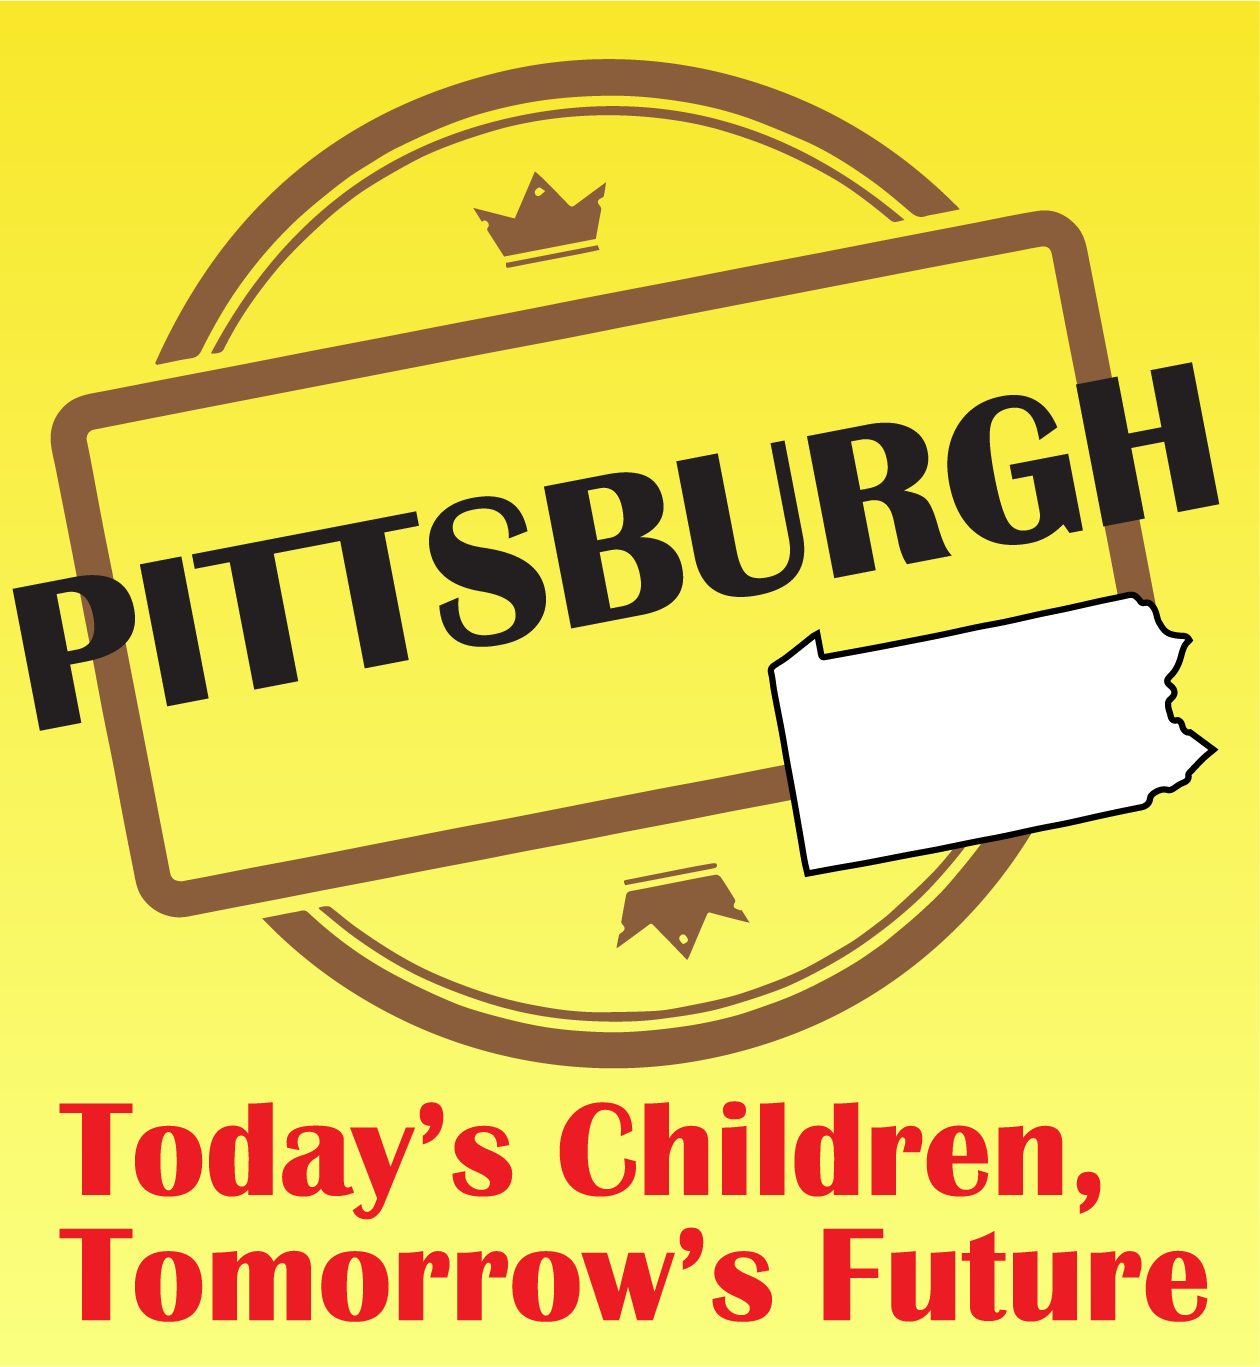 Image for Today's Children Tomorrow's Future - Pittsburgh